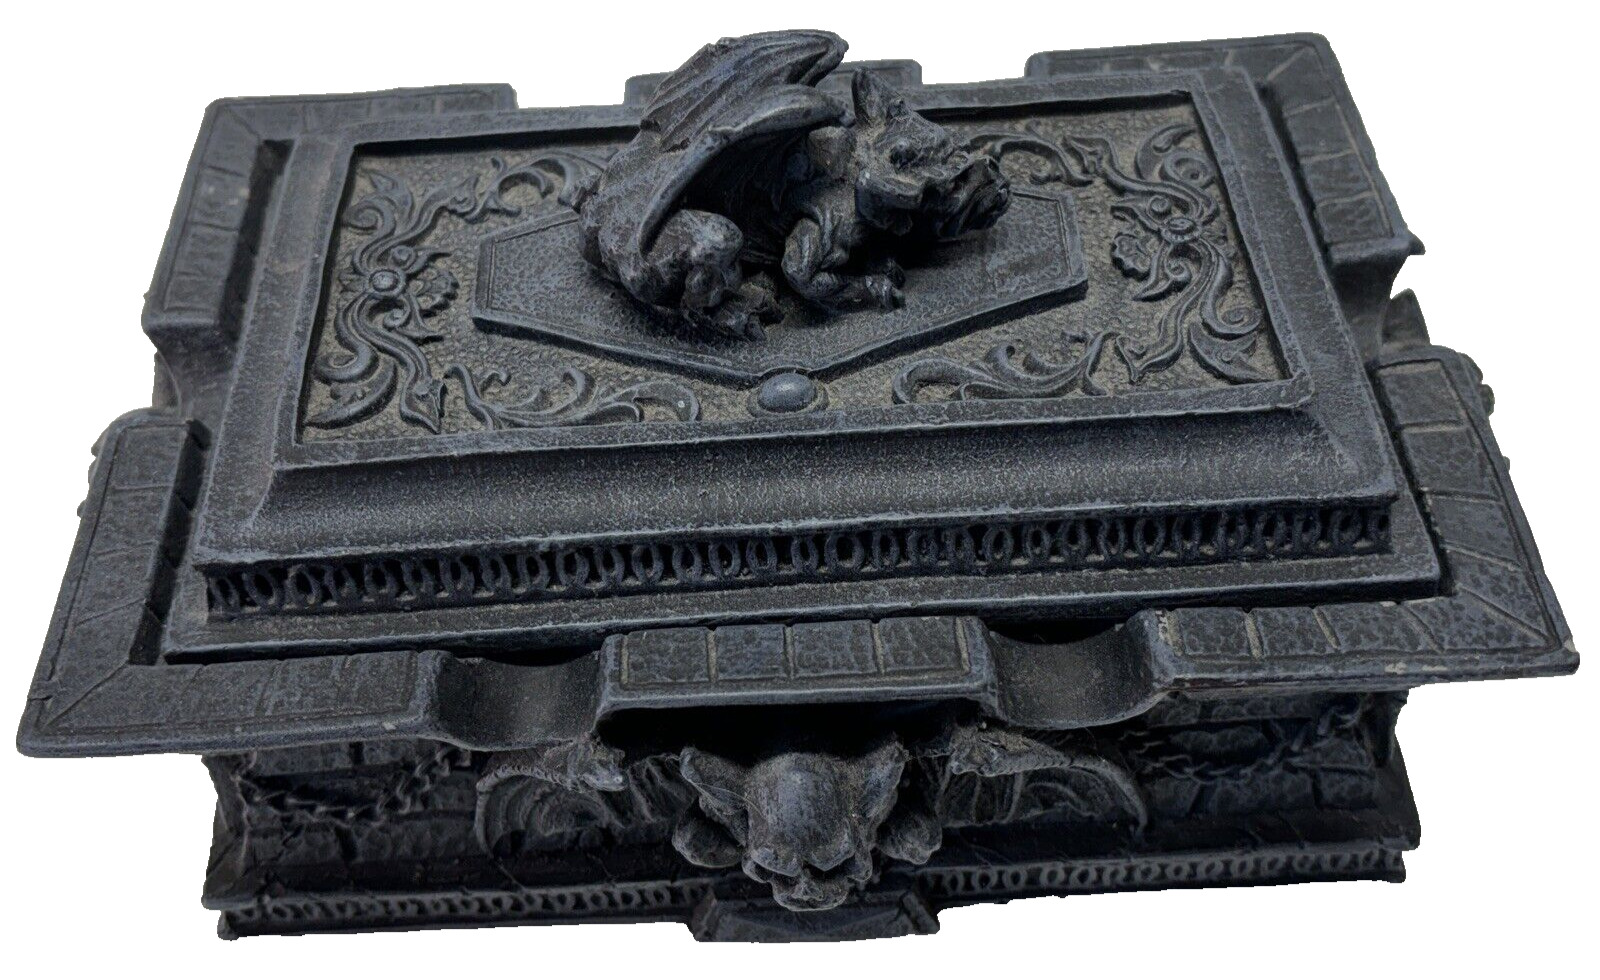 Decorative Carved Dragon Medieval Storage Box Dungeon  Coffin  Cigar Tray  READ